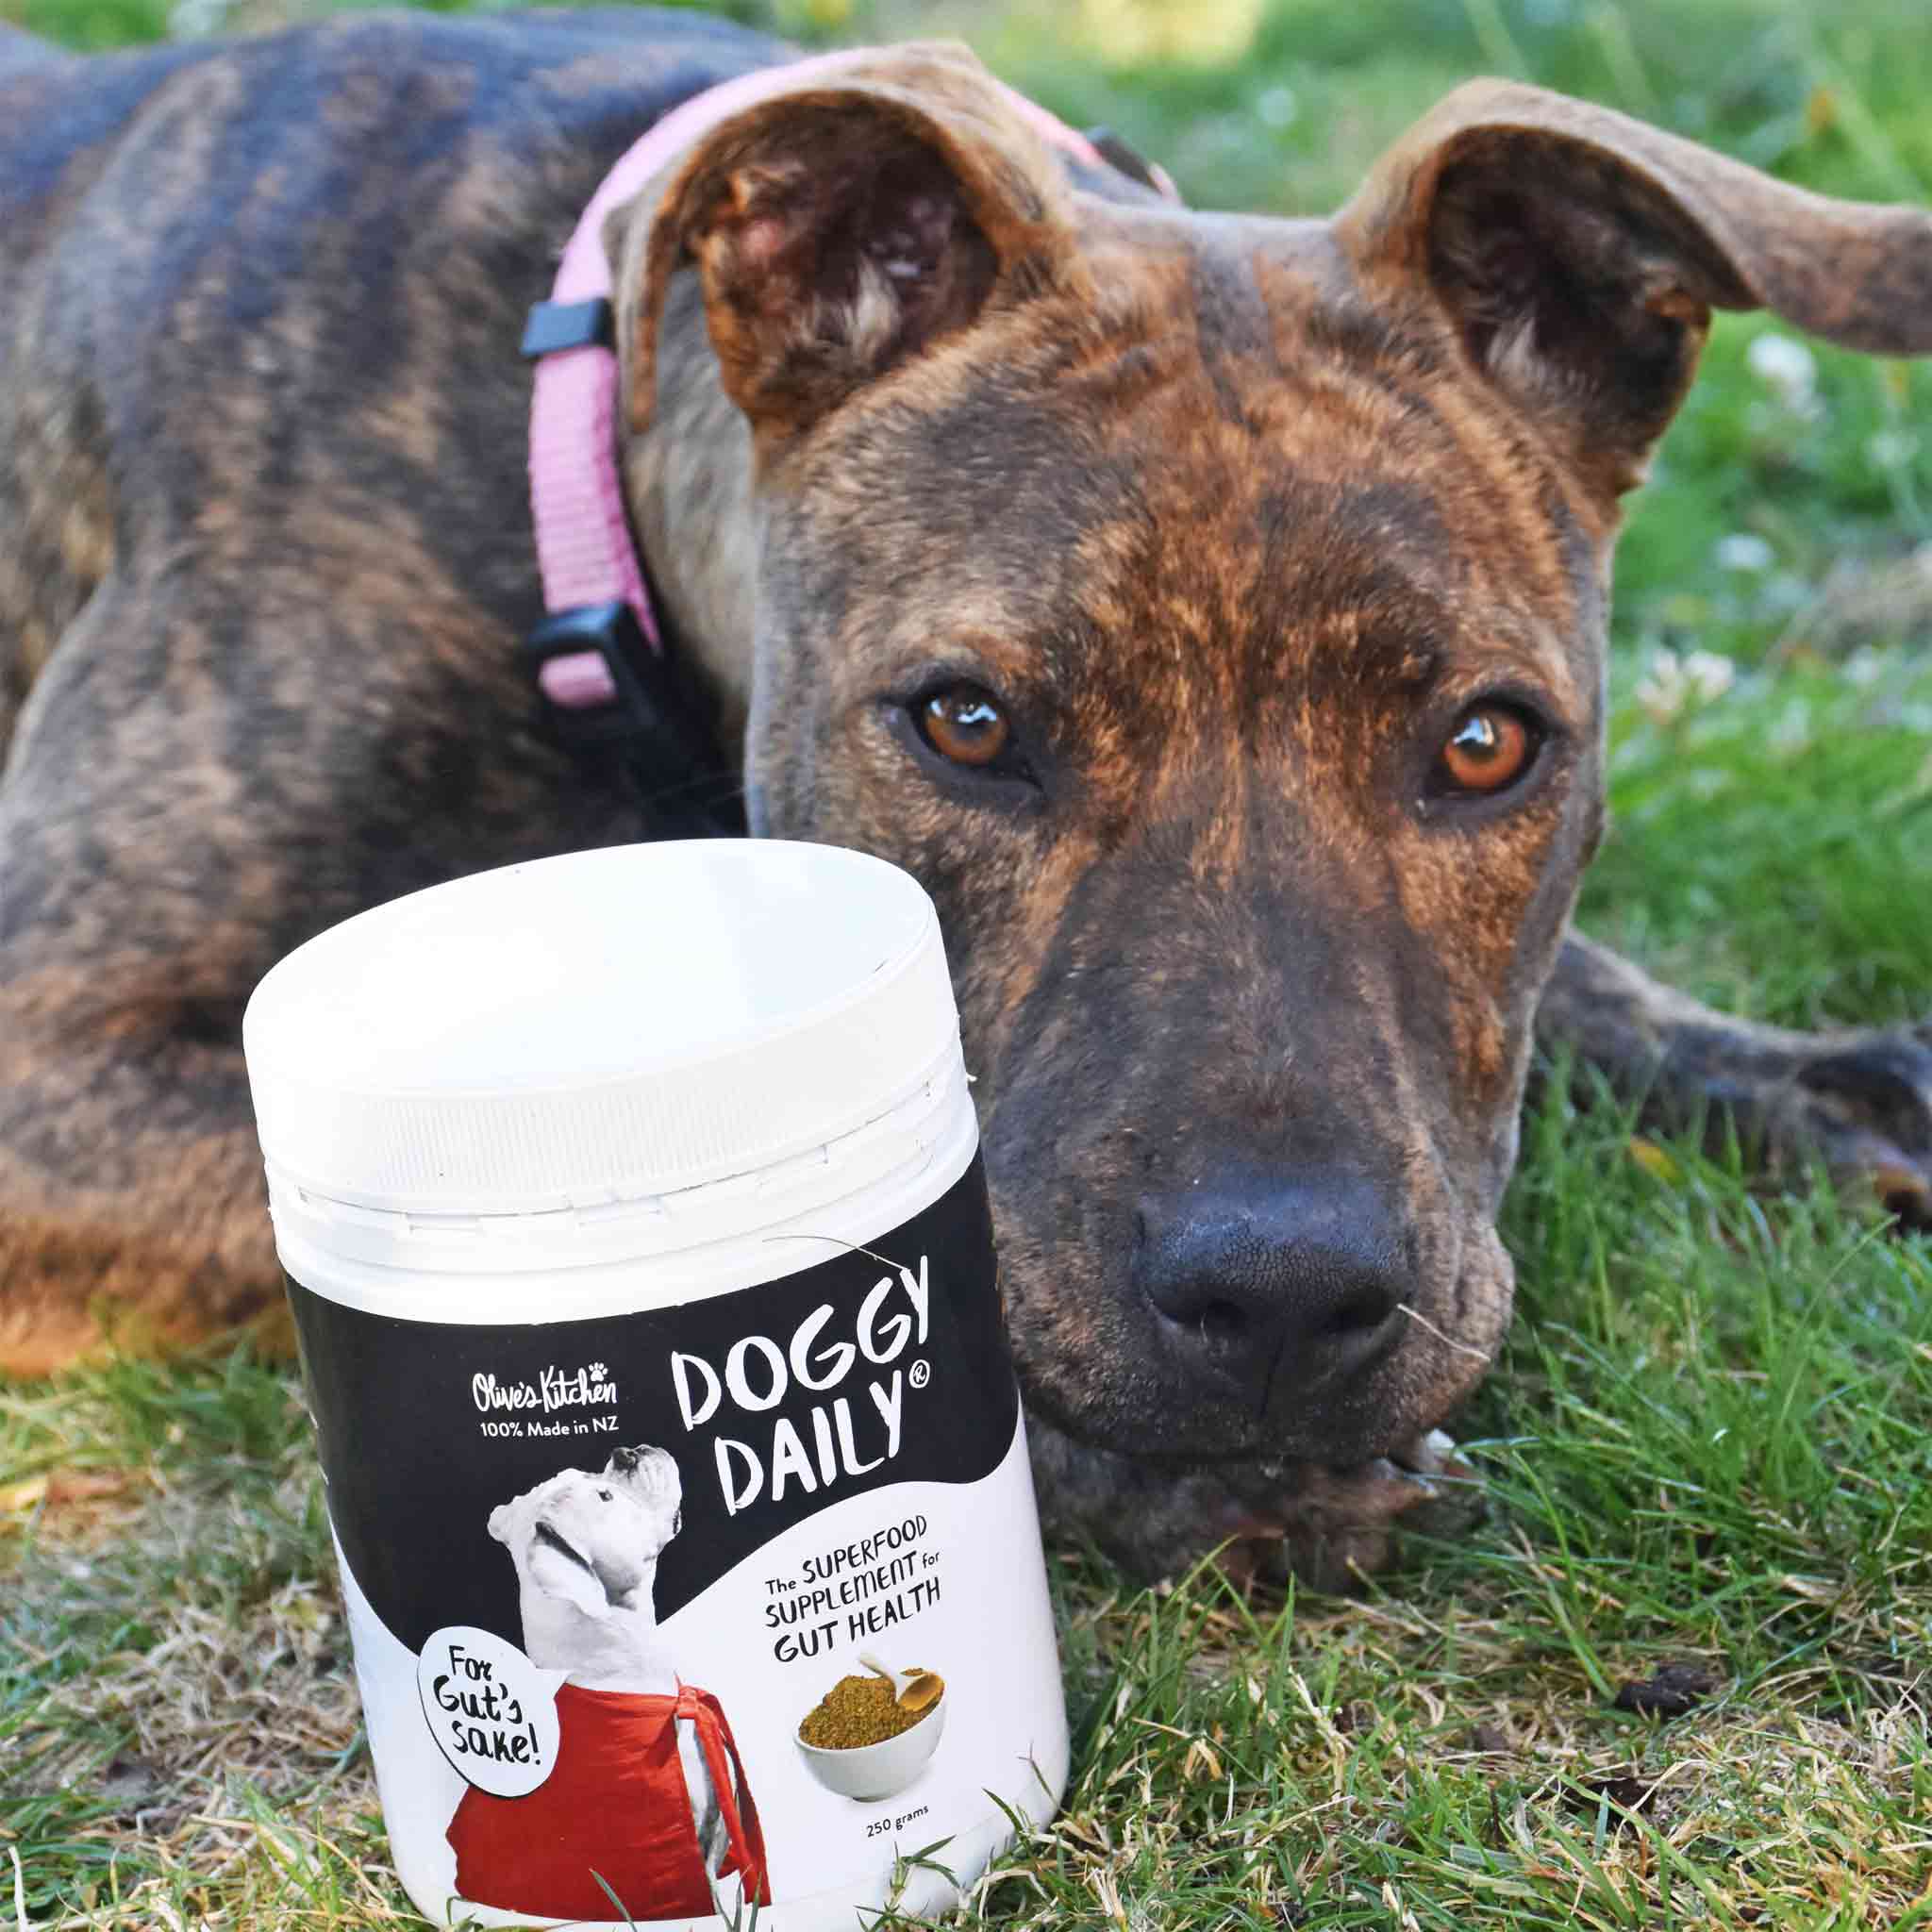 doggy daily superfood supplement for dog food